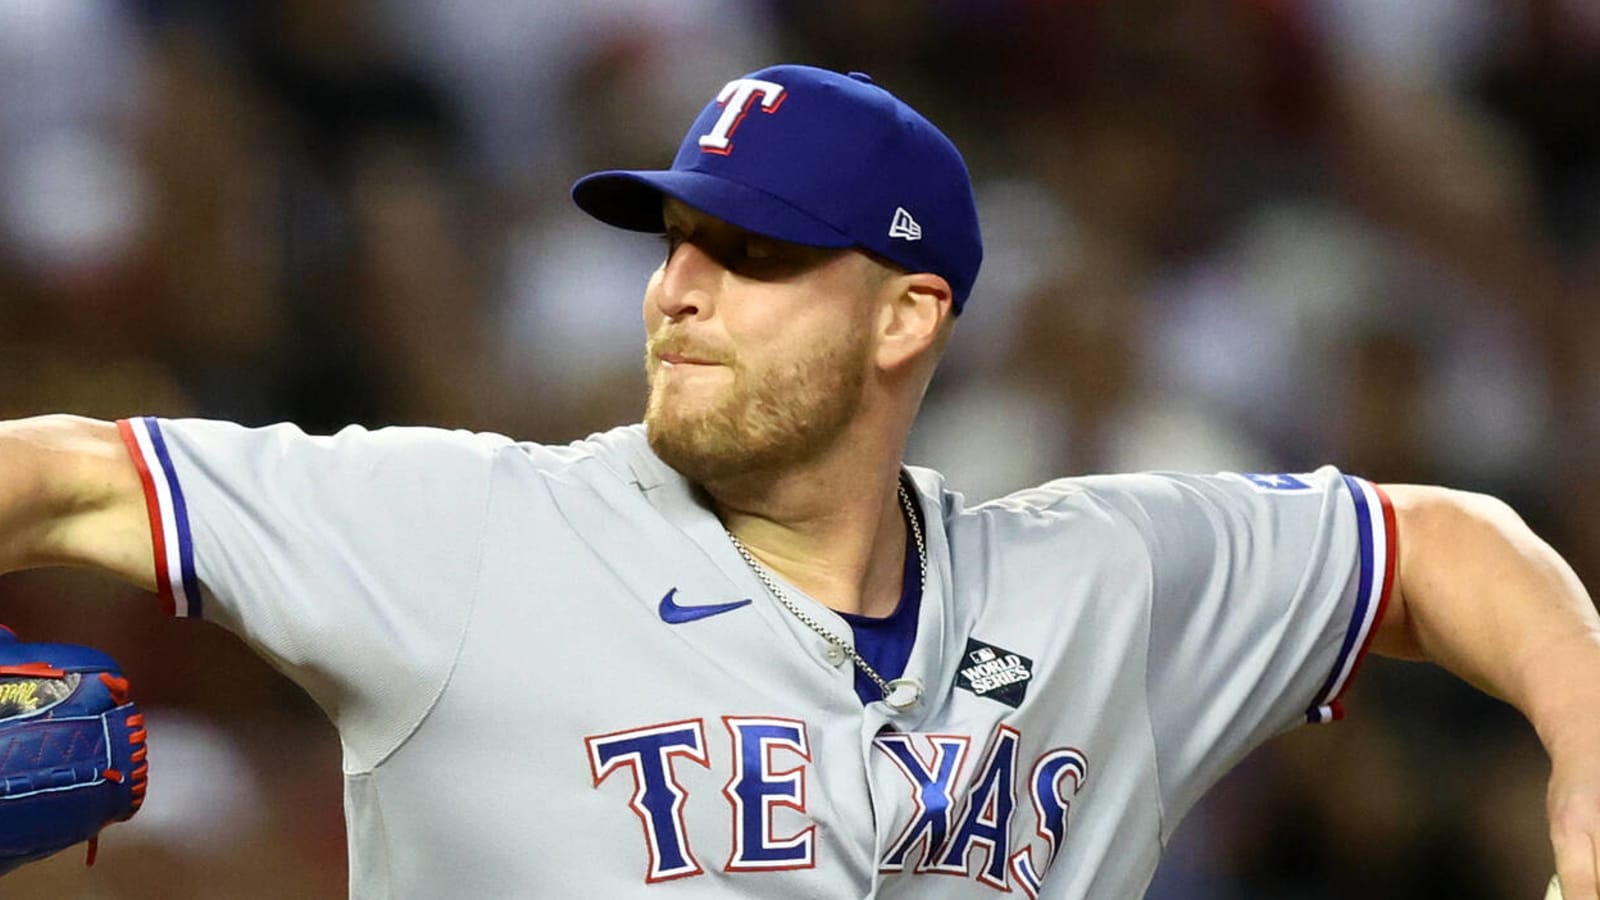 Royals sign one-time All-Star reliever to one-year deal